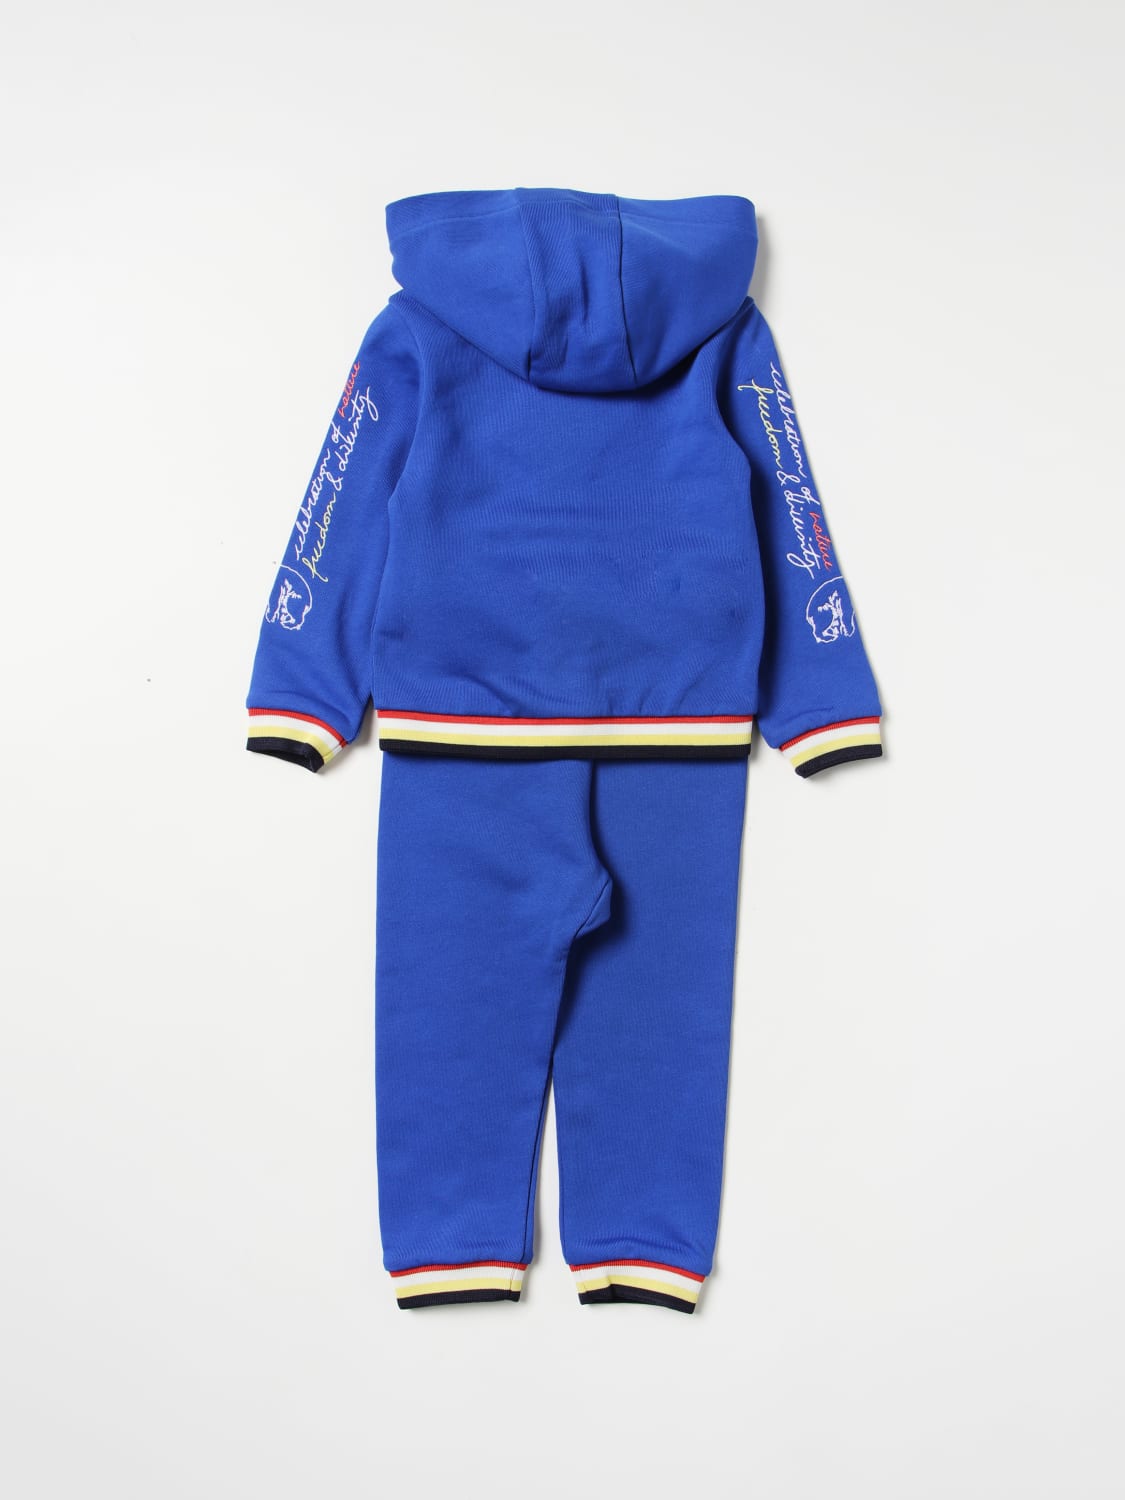 Kenzo Kids Outlet: jumpsuit for baby - Blue | Kenzo Kids jumpsuit ...